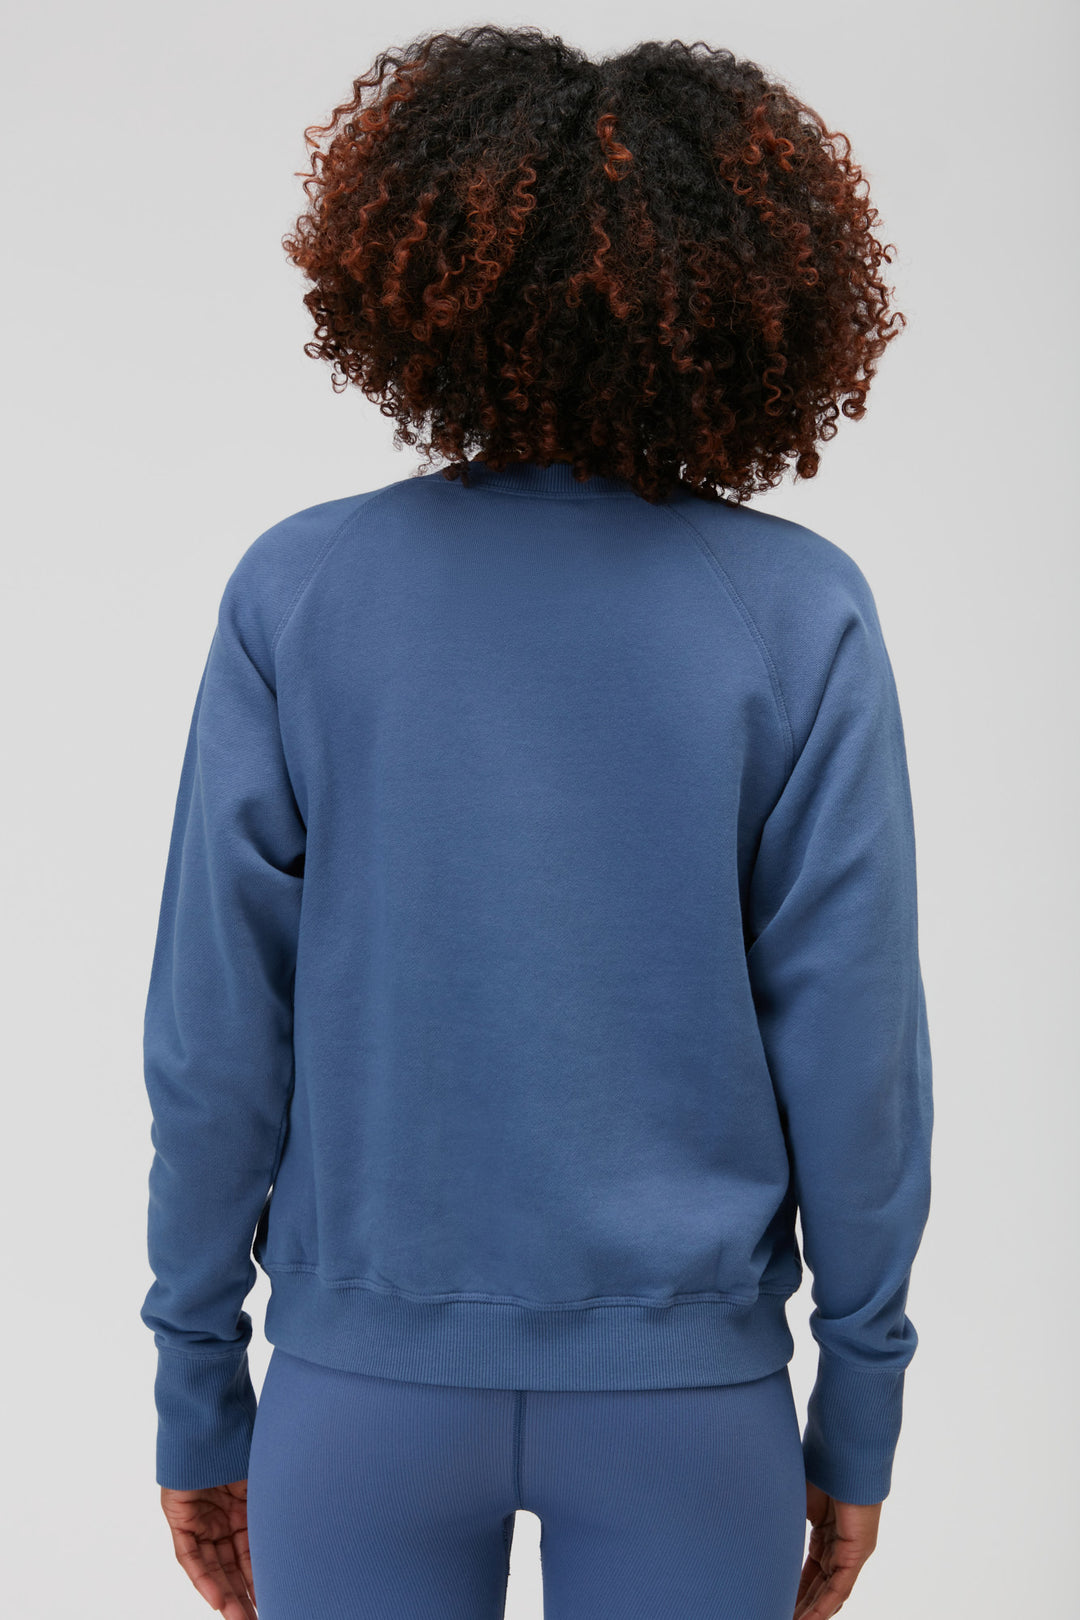 SEE THE GOOD RAGLAN PULLOVER - DUSTY DENIM - Kingfisher Road - Online Boutique